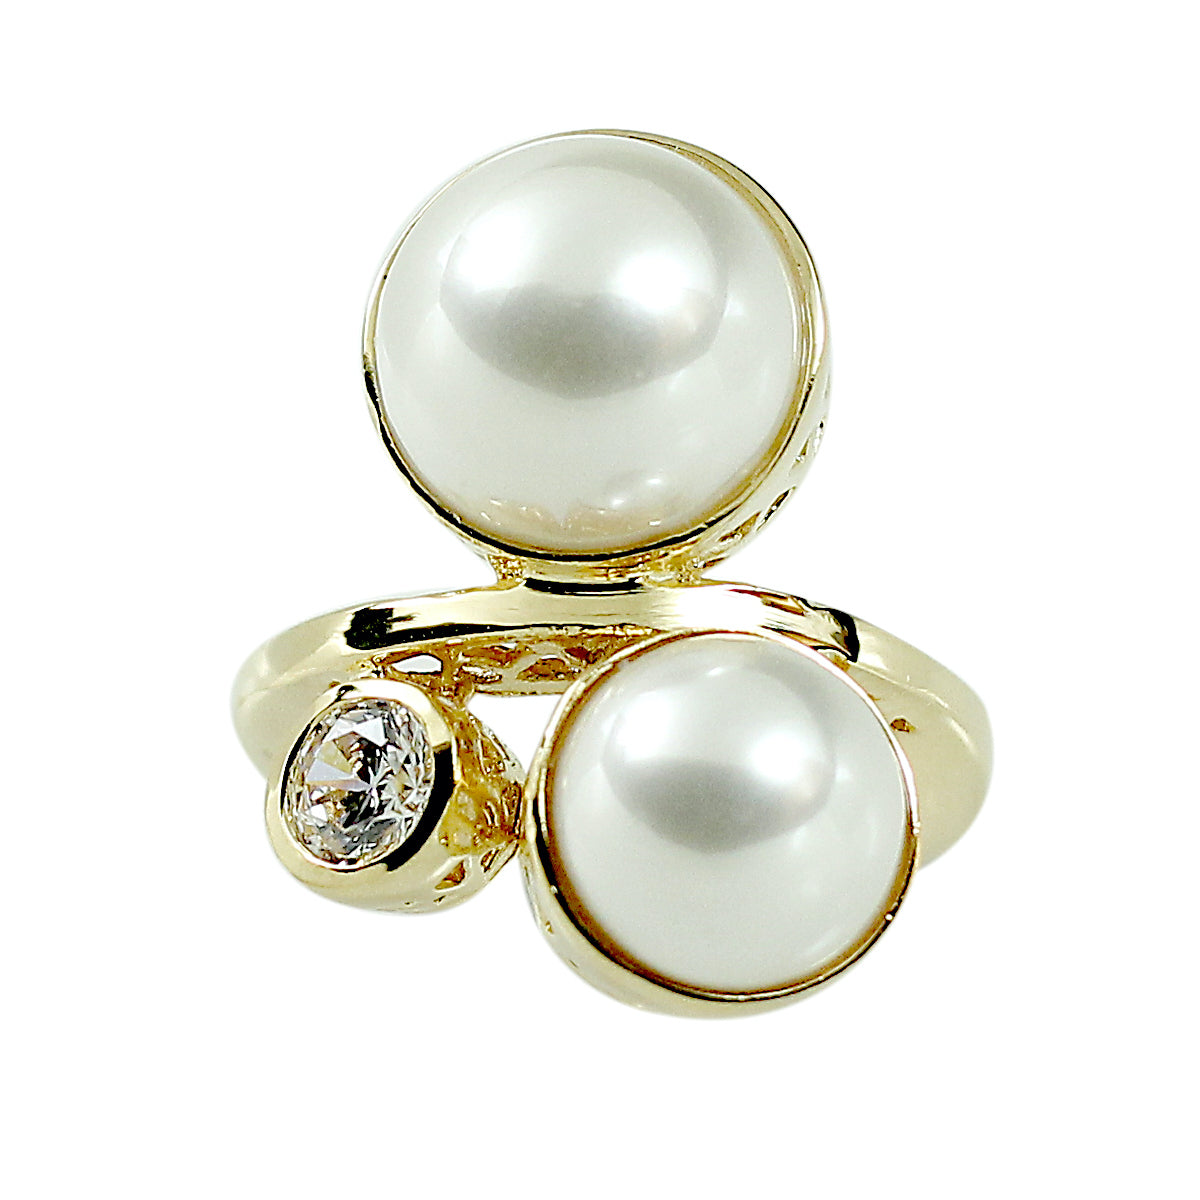 Double Cabochon Pearl 14K Statement Ring